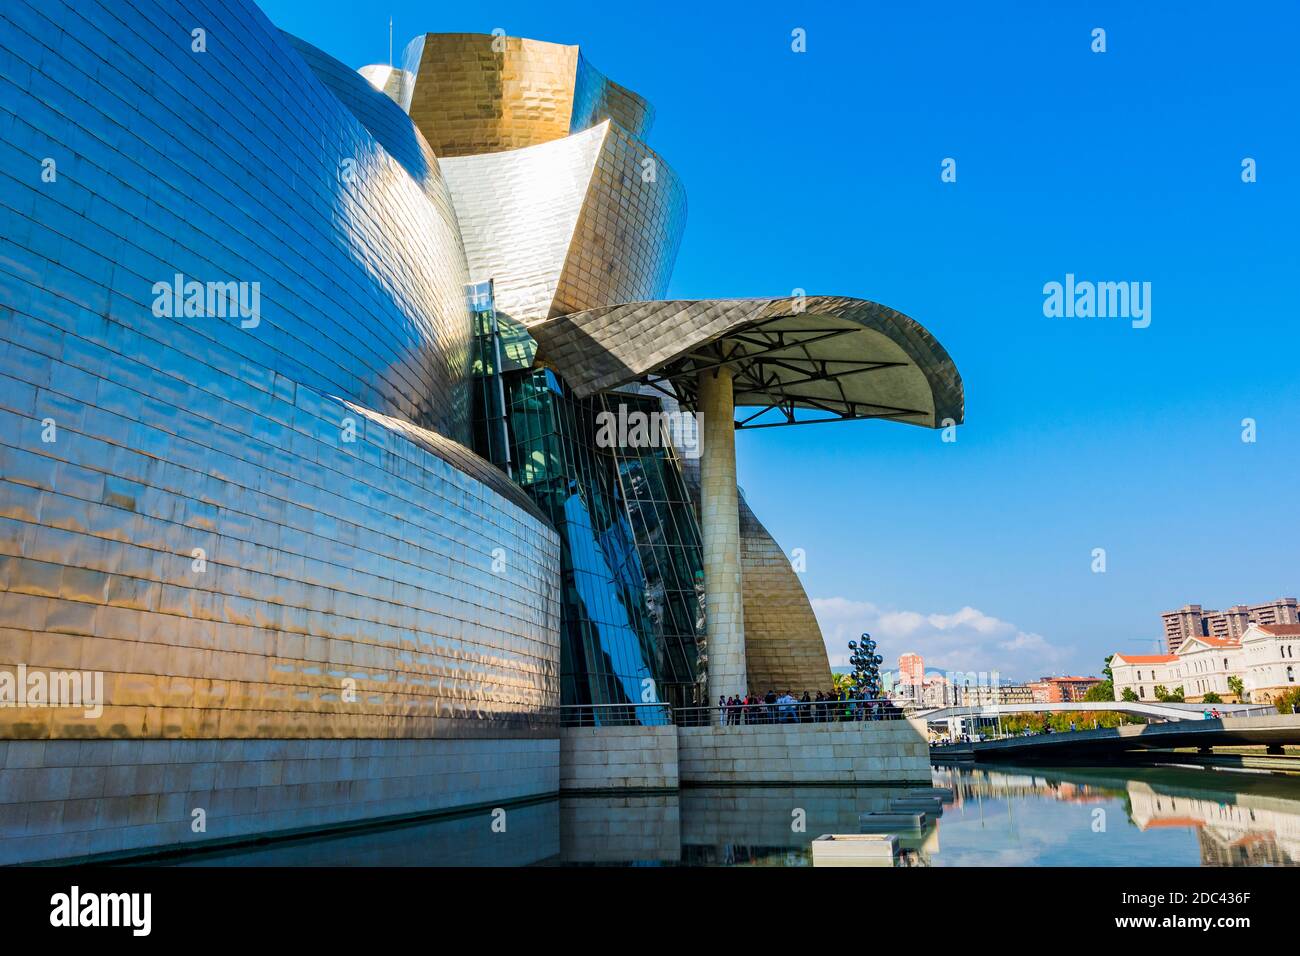 Detail of the facade. The Guggenheim Museum Bilbao is a museum of modern and contemporary art designed by Canadian-American architect Frank Gehry, Bil Stock Photo